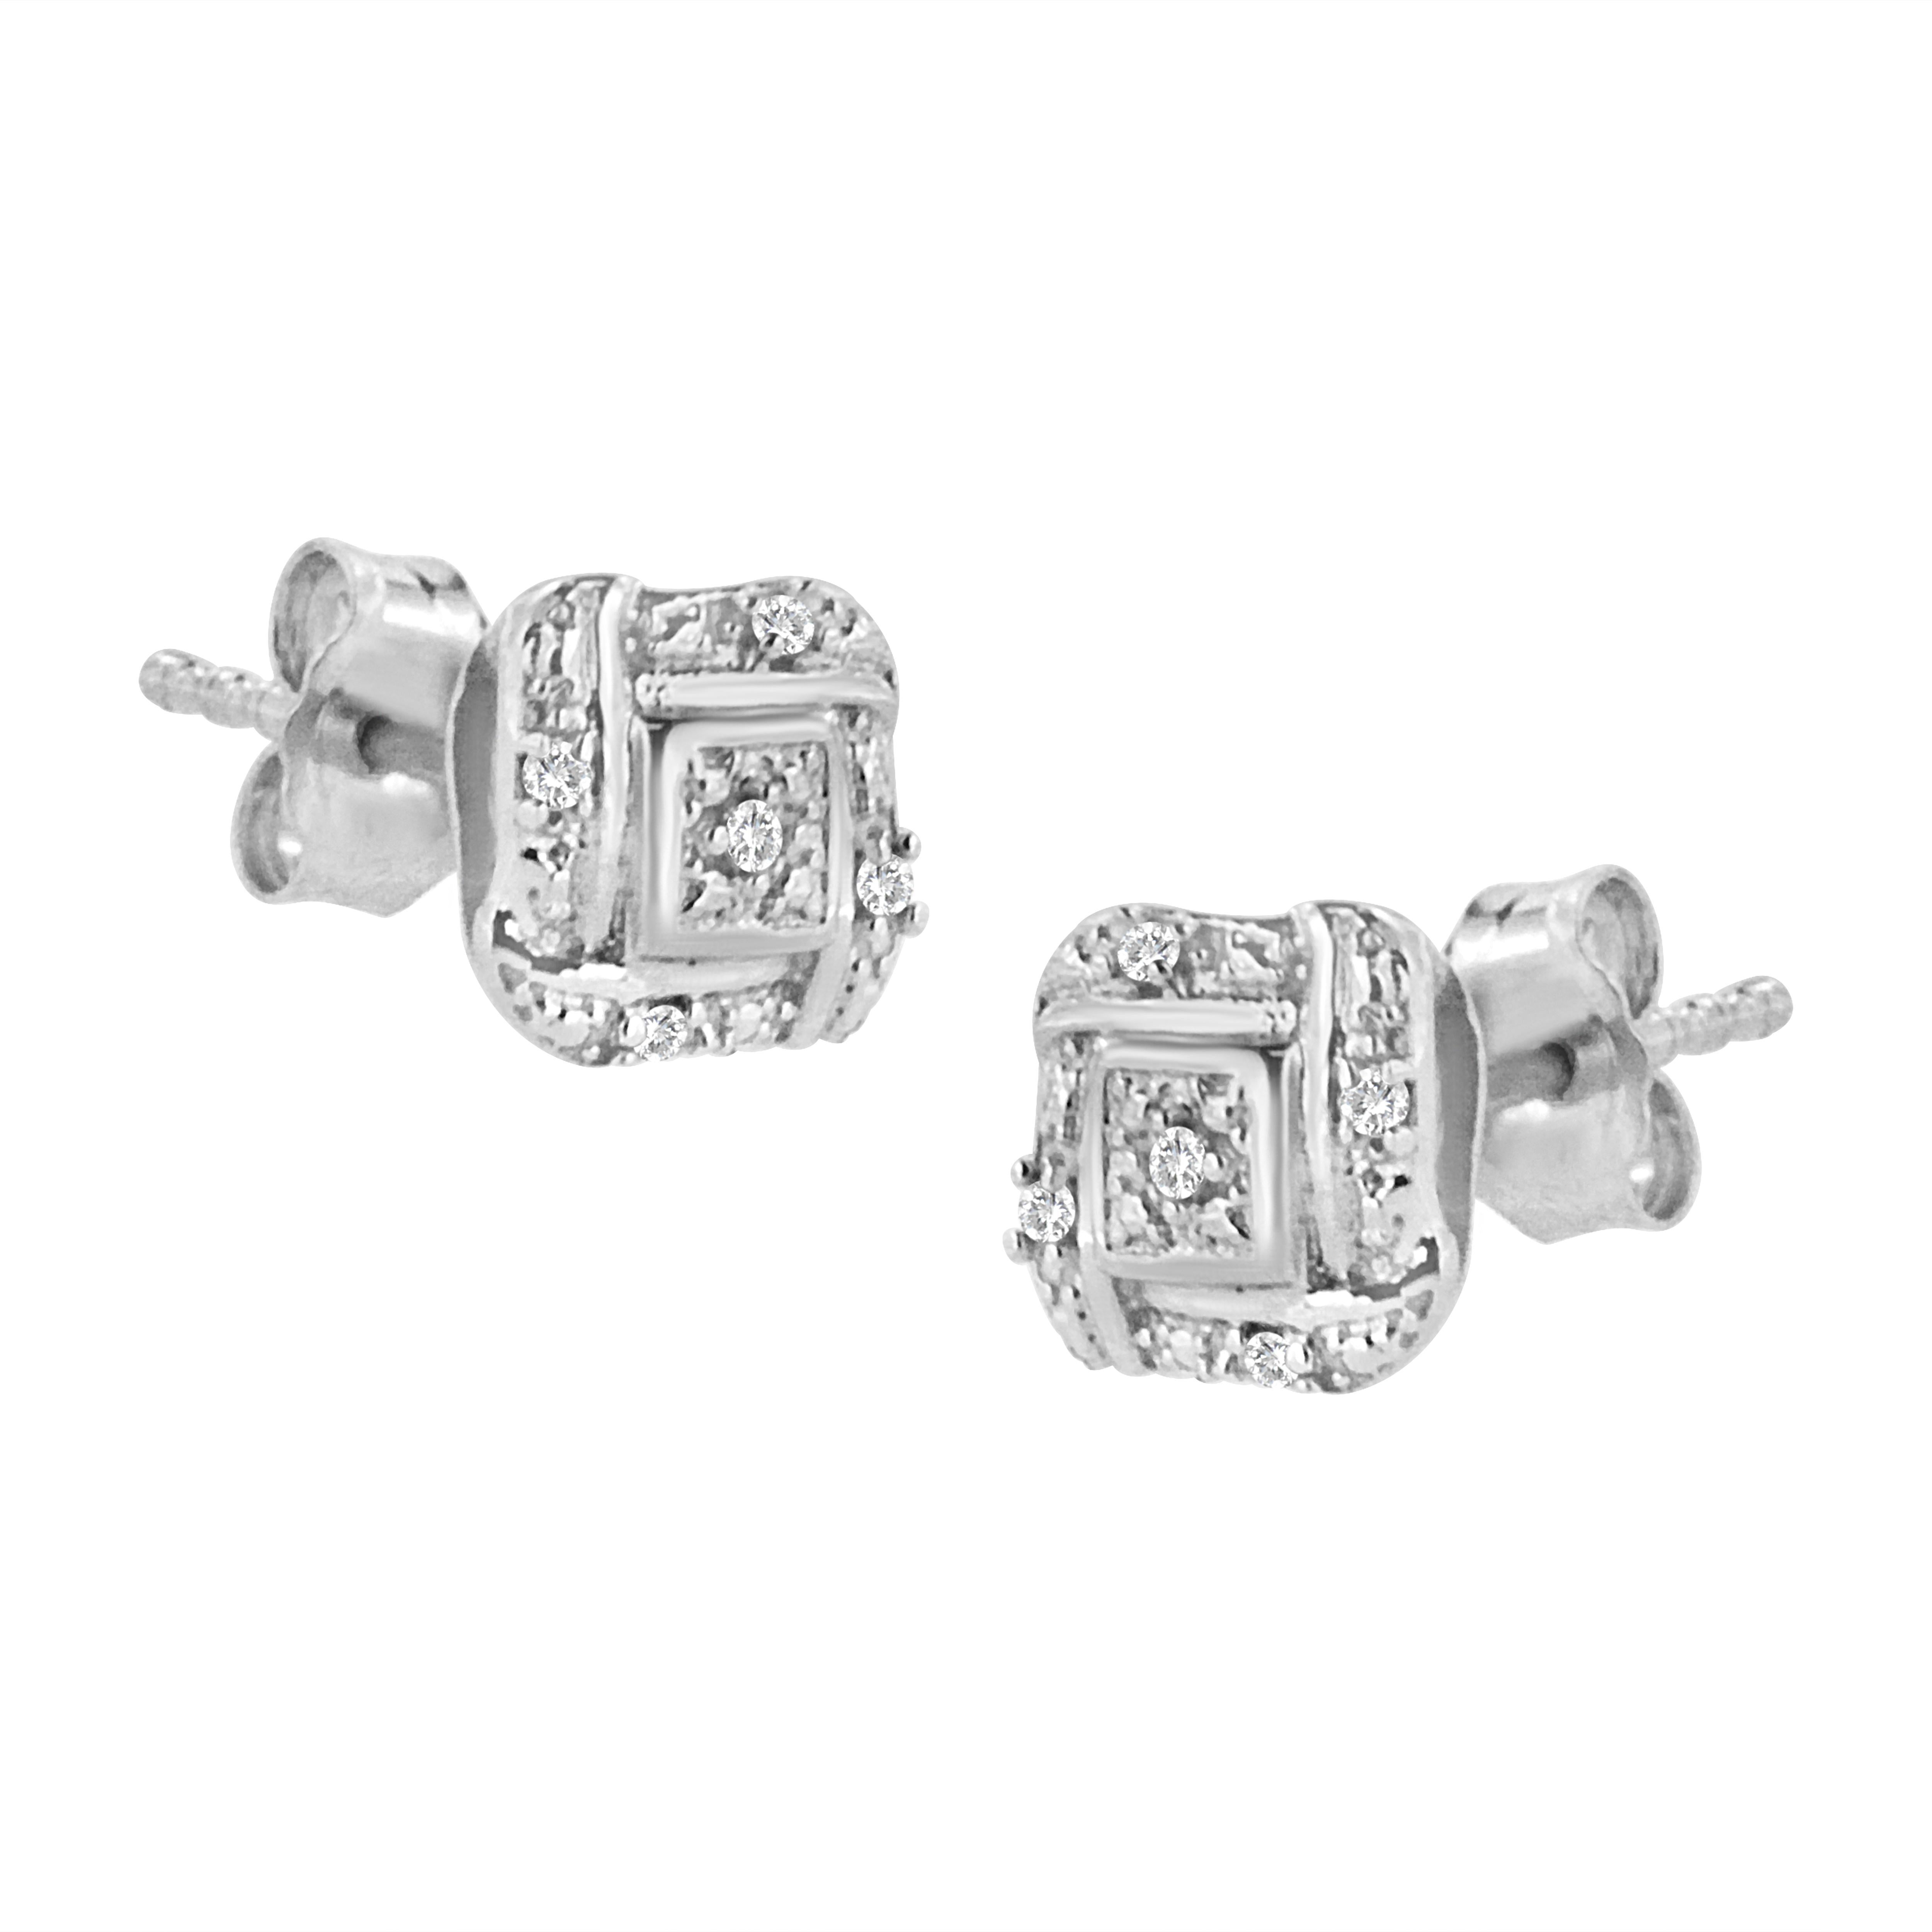 Simple is classy, and this pair of earrings defines this statement beautifully. Composed of sterling silver, these square shaped stud earrings are embellished with sparkling round cut diamonds. Stylish and easy to wear, the earrings make an ideal